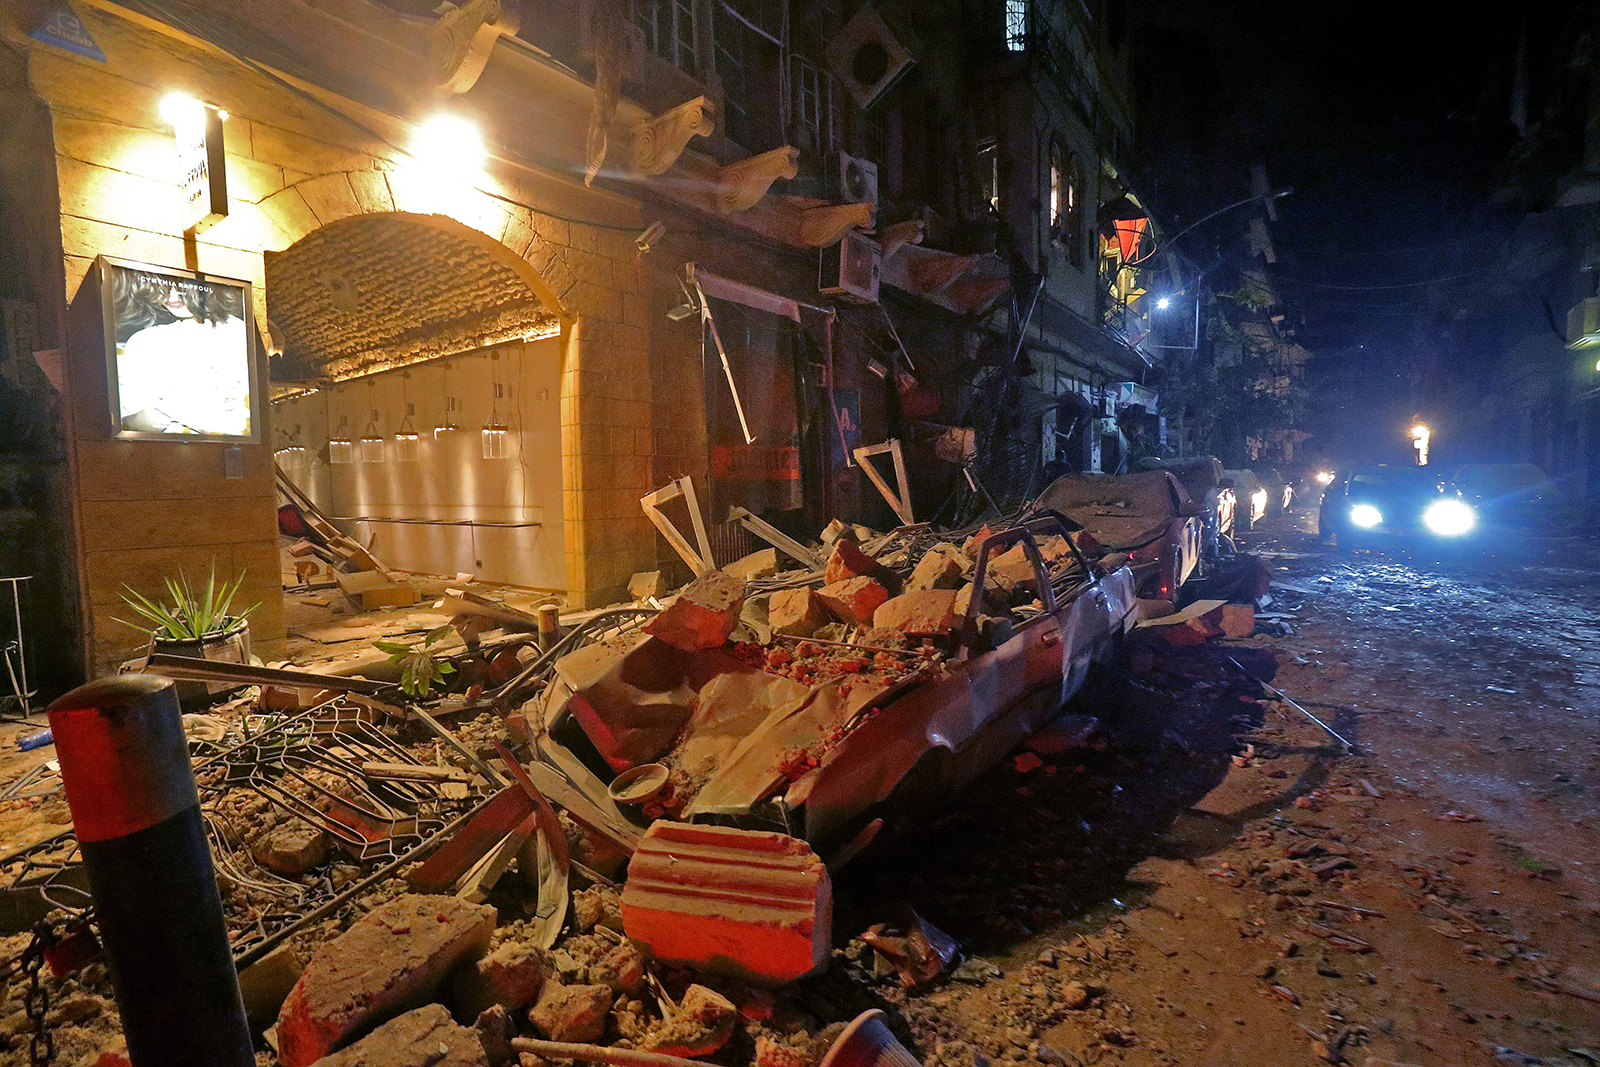 deadly explosion in beirut shocks the world trump said it looks like a terrible attack